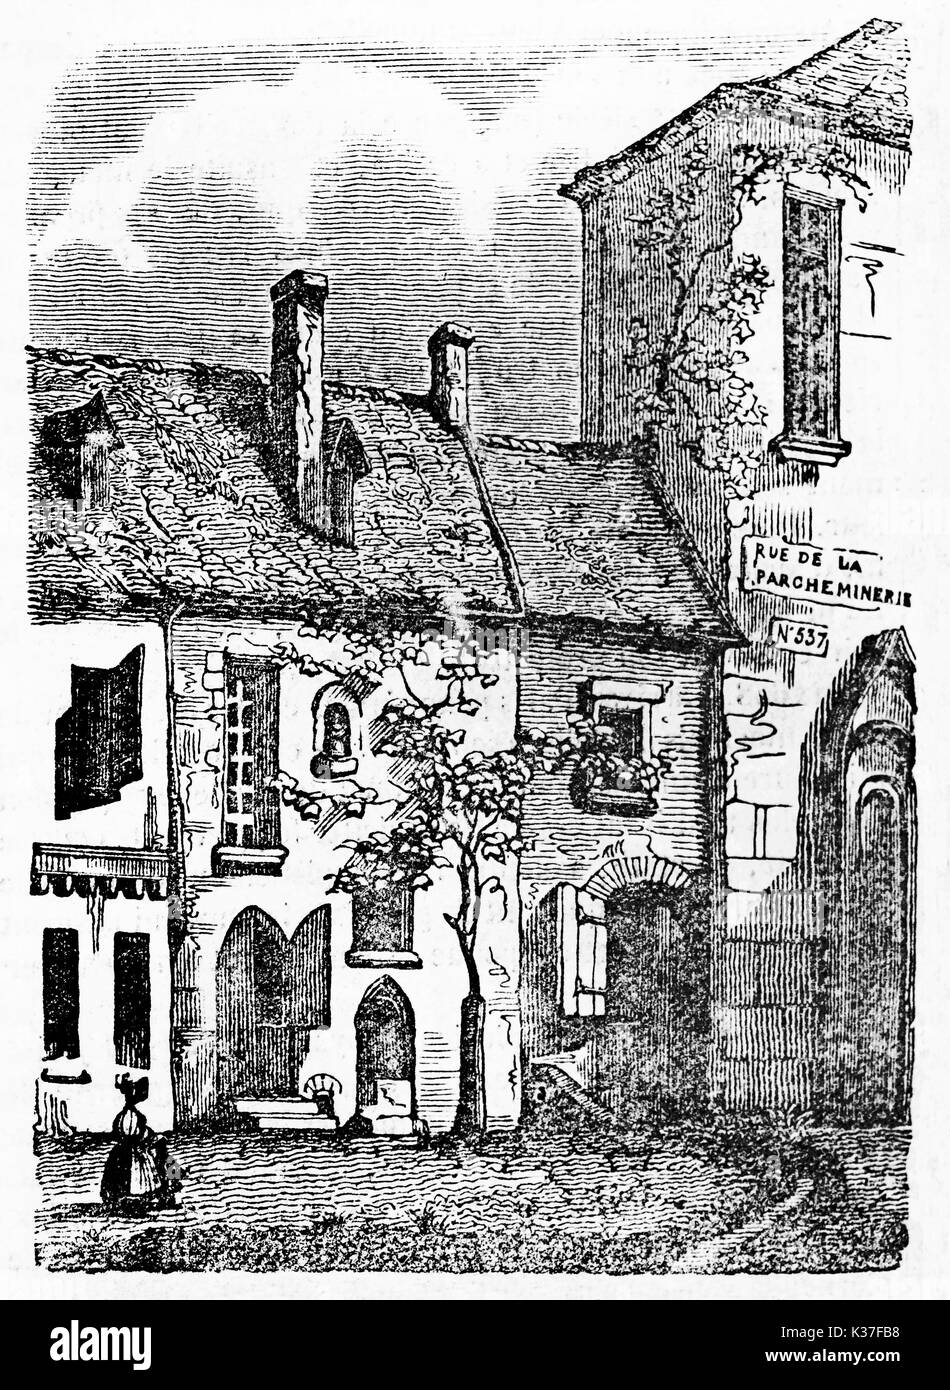 Isolated ancient country stone house owned by Adam Billaut (1602 - 1662) French carpenter poet and singer in Nevers. Old Illustration by unidentified author publ. on Magasin Pittoresque Paris 1834 Stock Photo